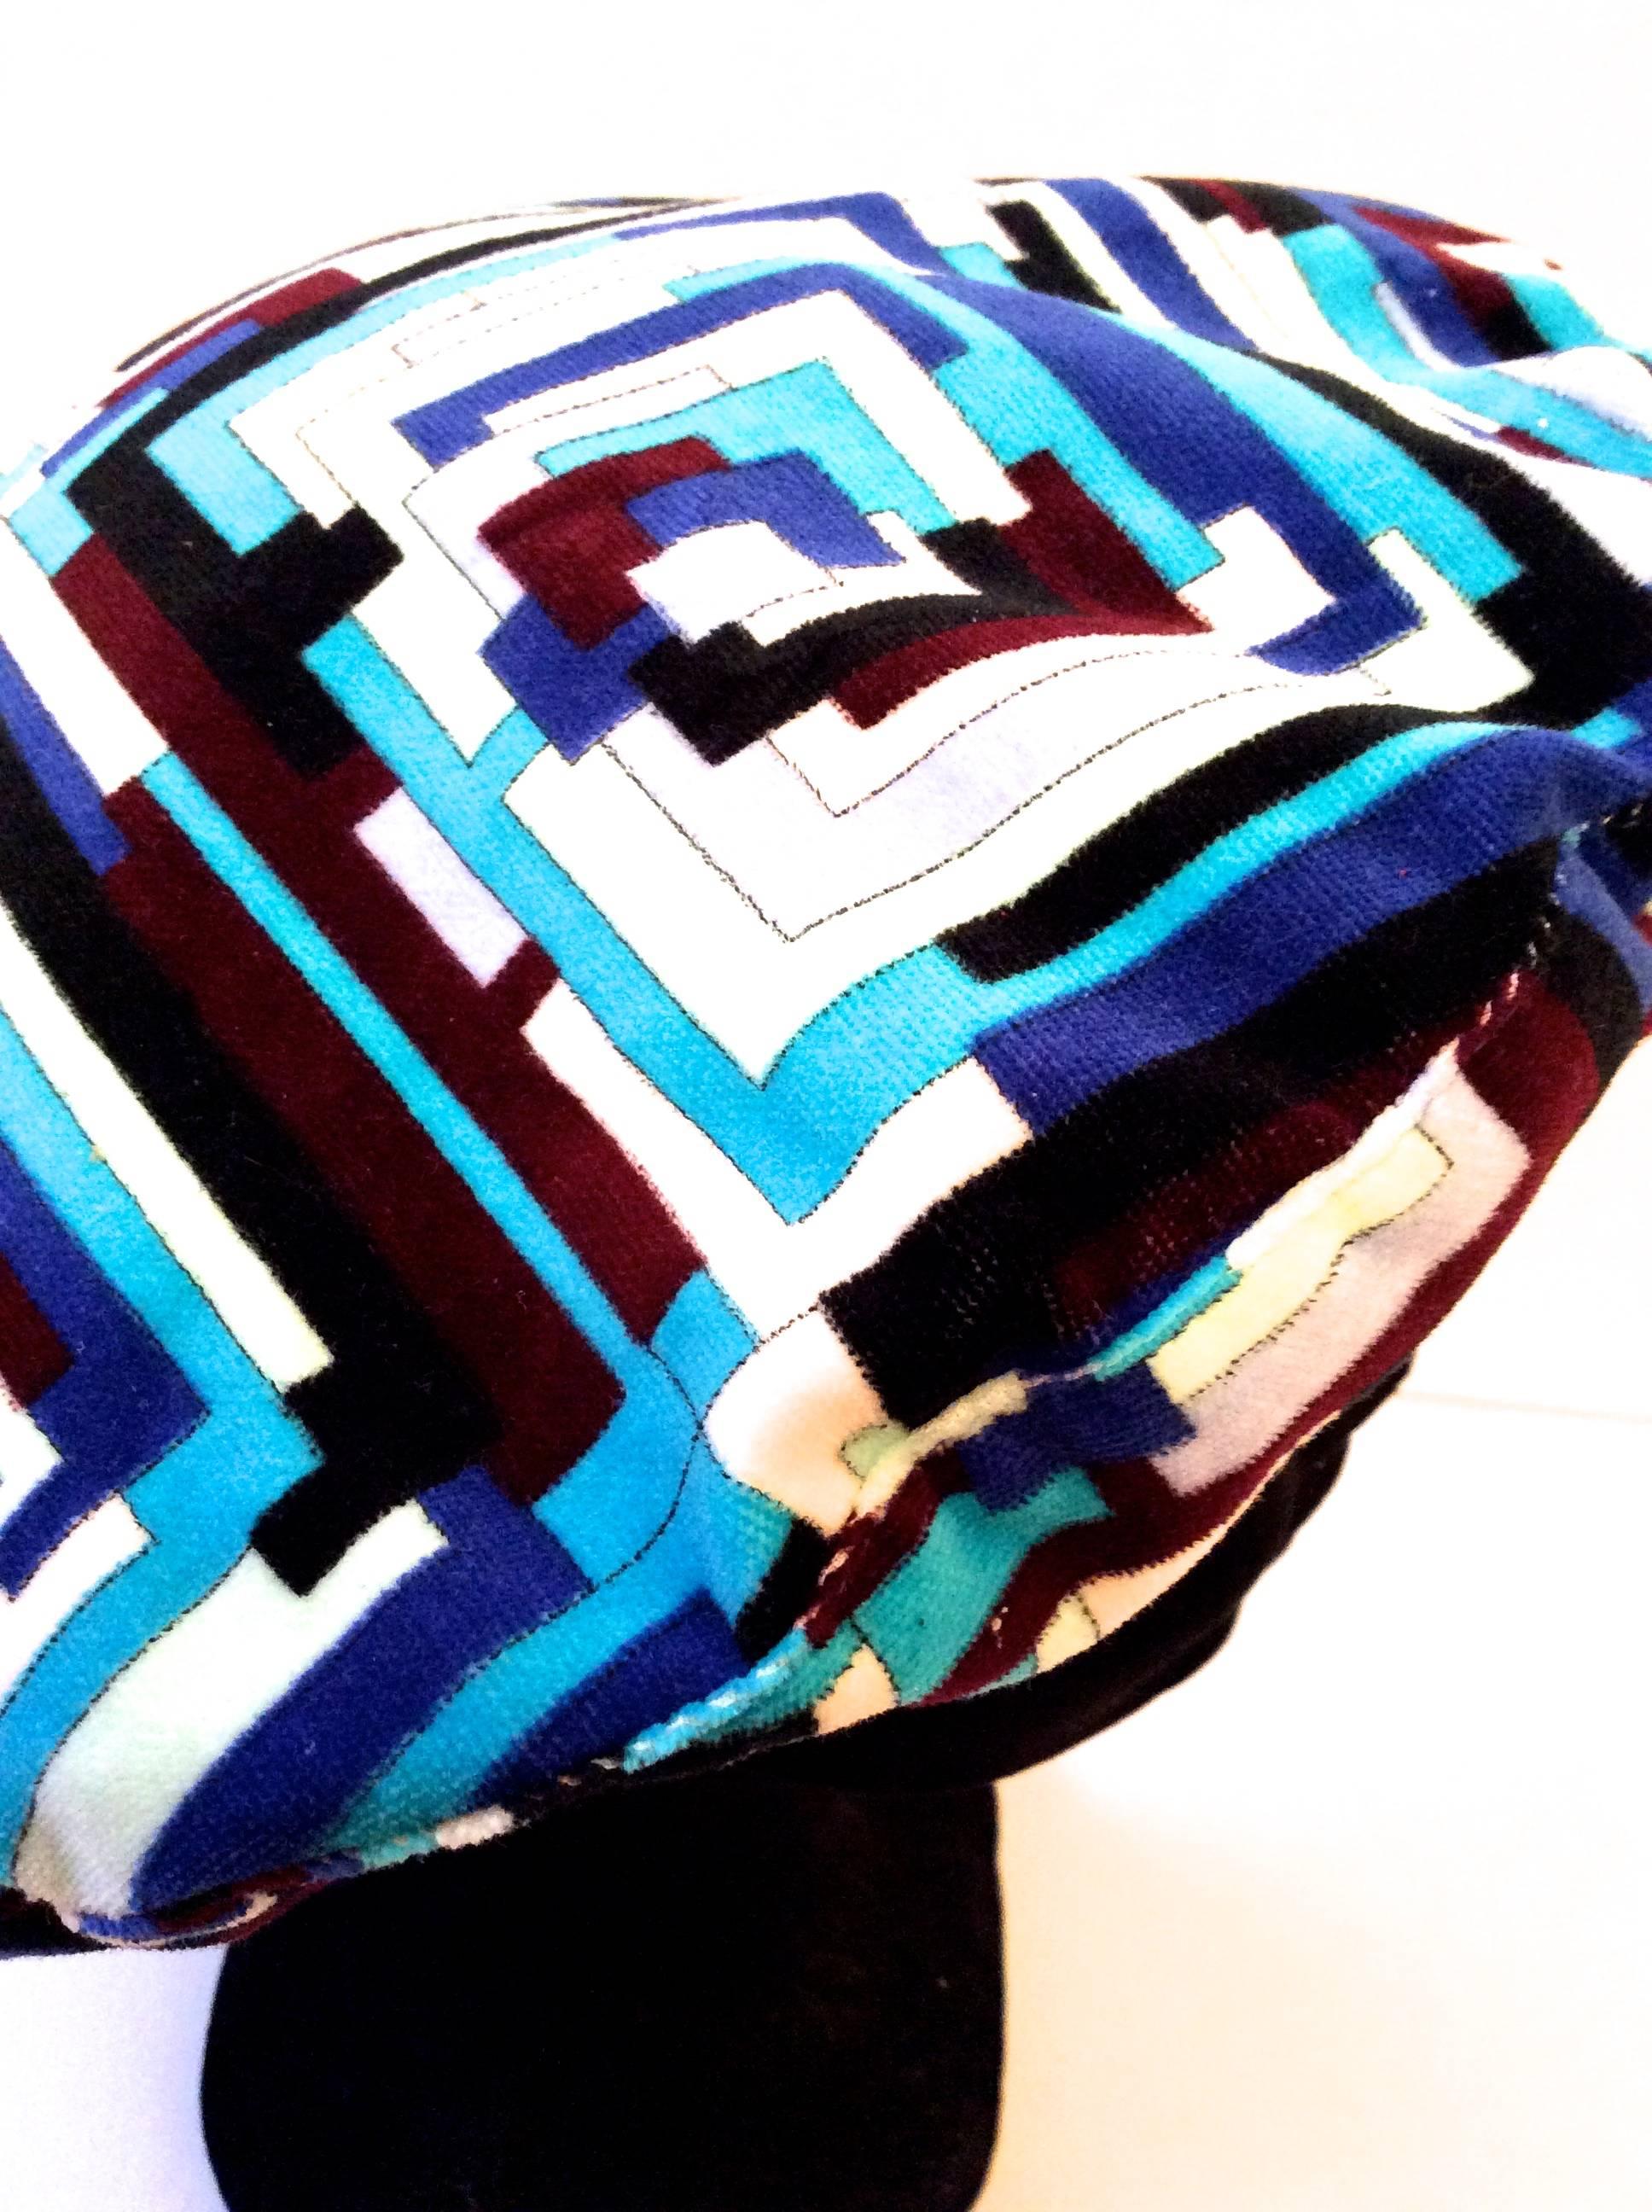 This Emilio Pucci beret is a gorgeous blend of shades of blue, white, black, and maroon. It is a gorgeous geometric rectangular design and is made of 100% cotton with a velvety textured fabric on the exterior. The beret is lined with a blend of 60%